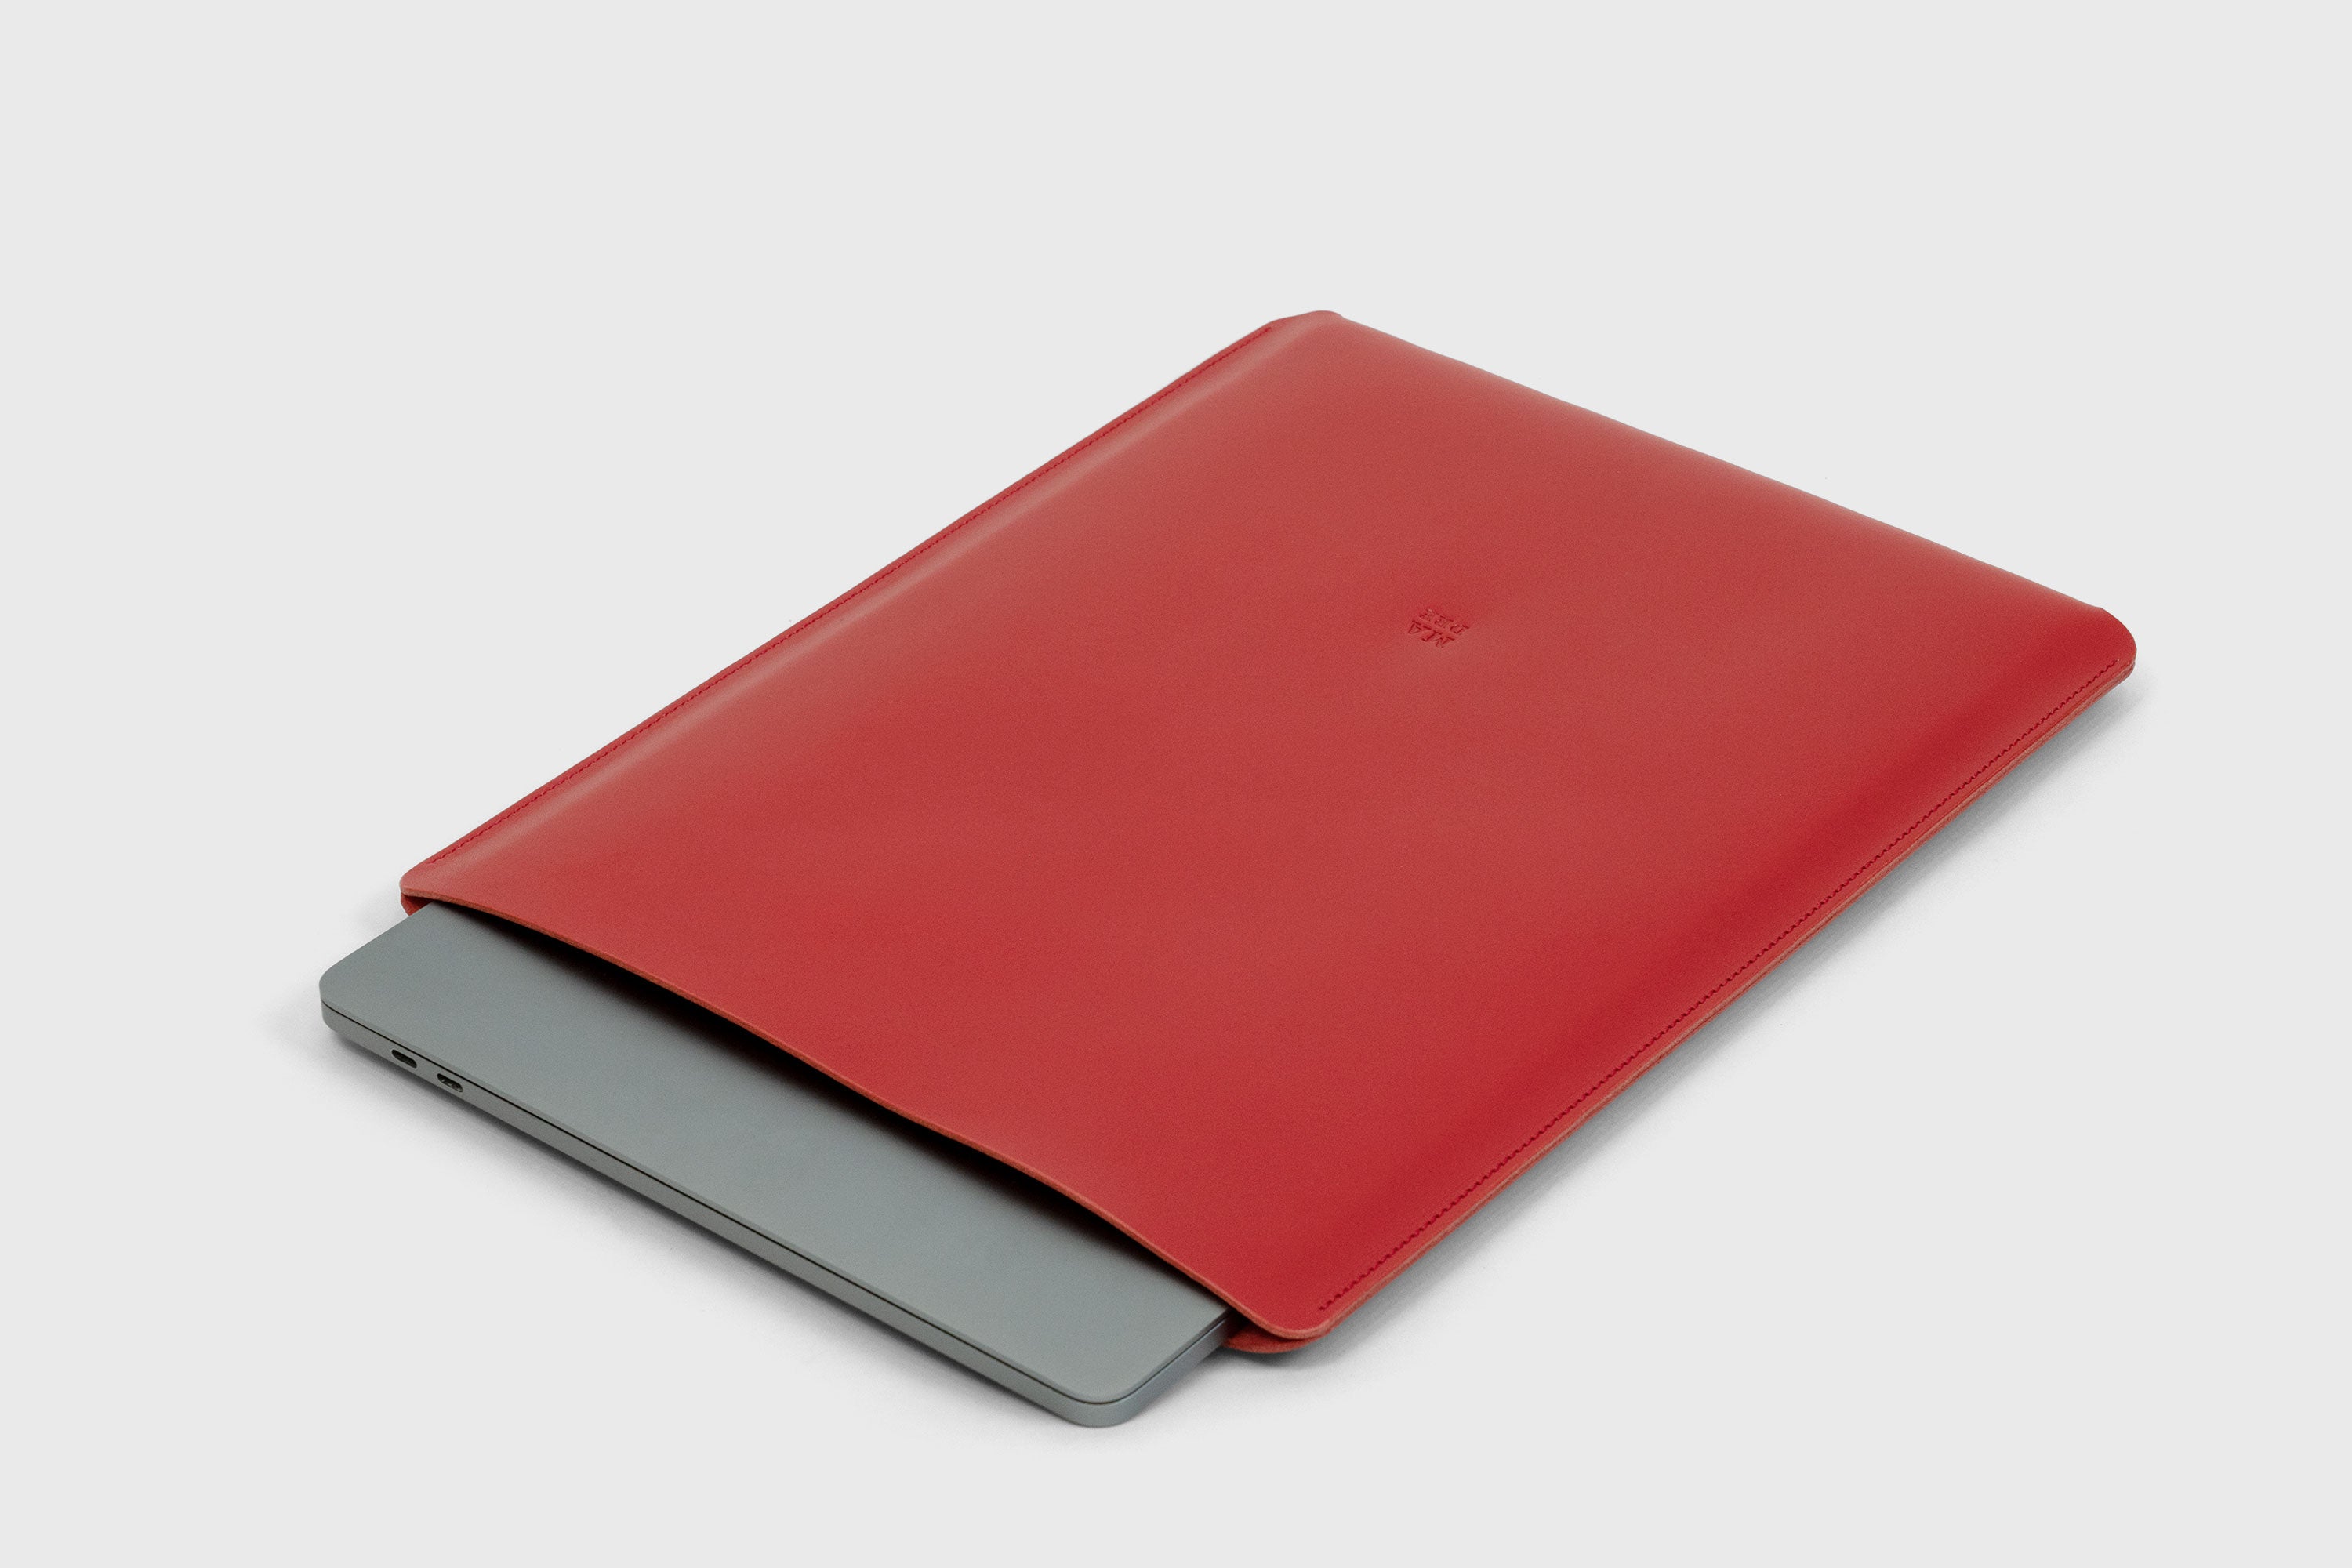 MacBook Air 15 Inch Sleeve Leather Red Colour Minimalistic Design Premium Quality By Atelier Madre Manuel Dreesmann Atelier Madre Barcelona Spain